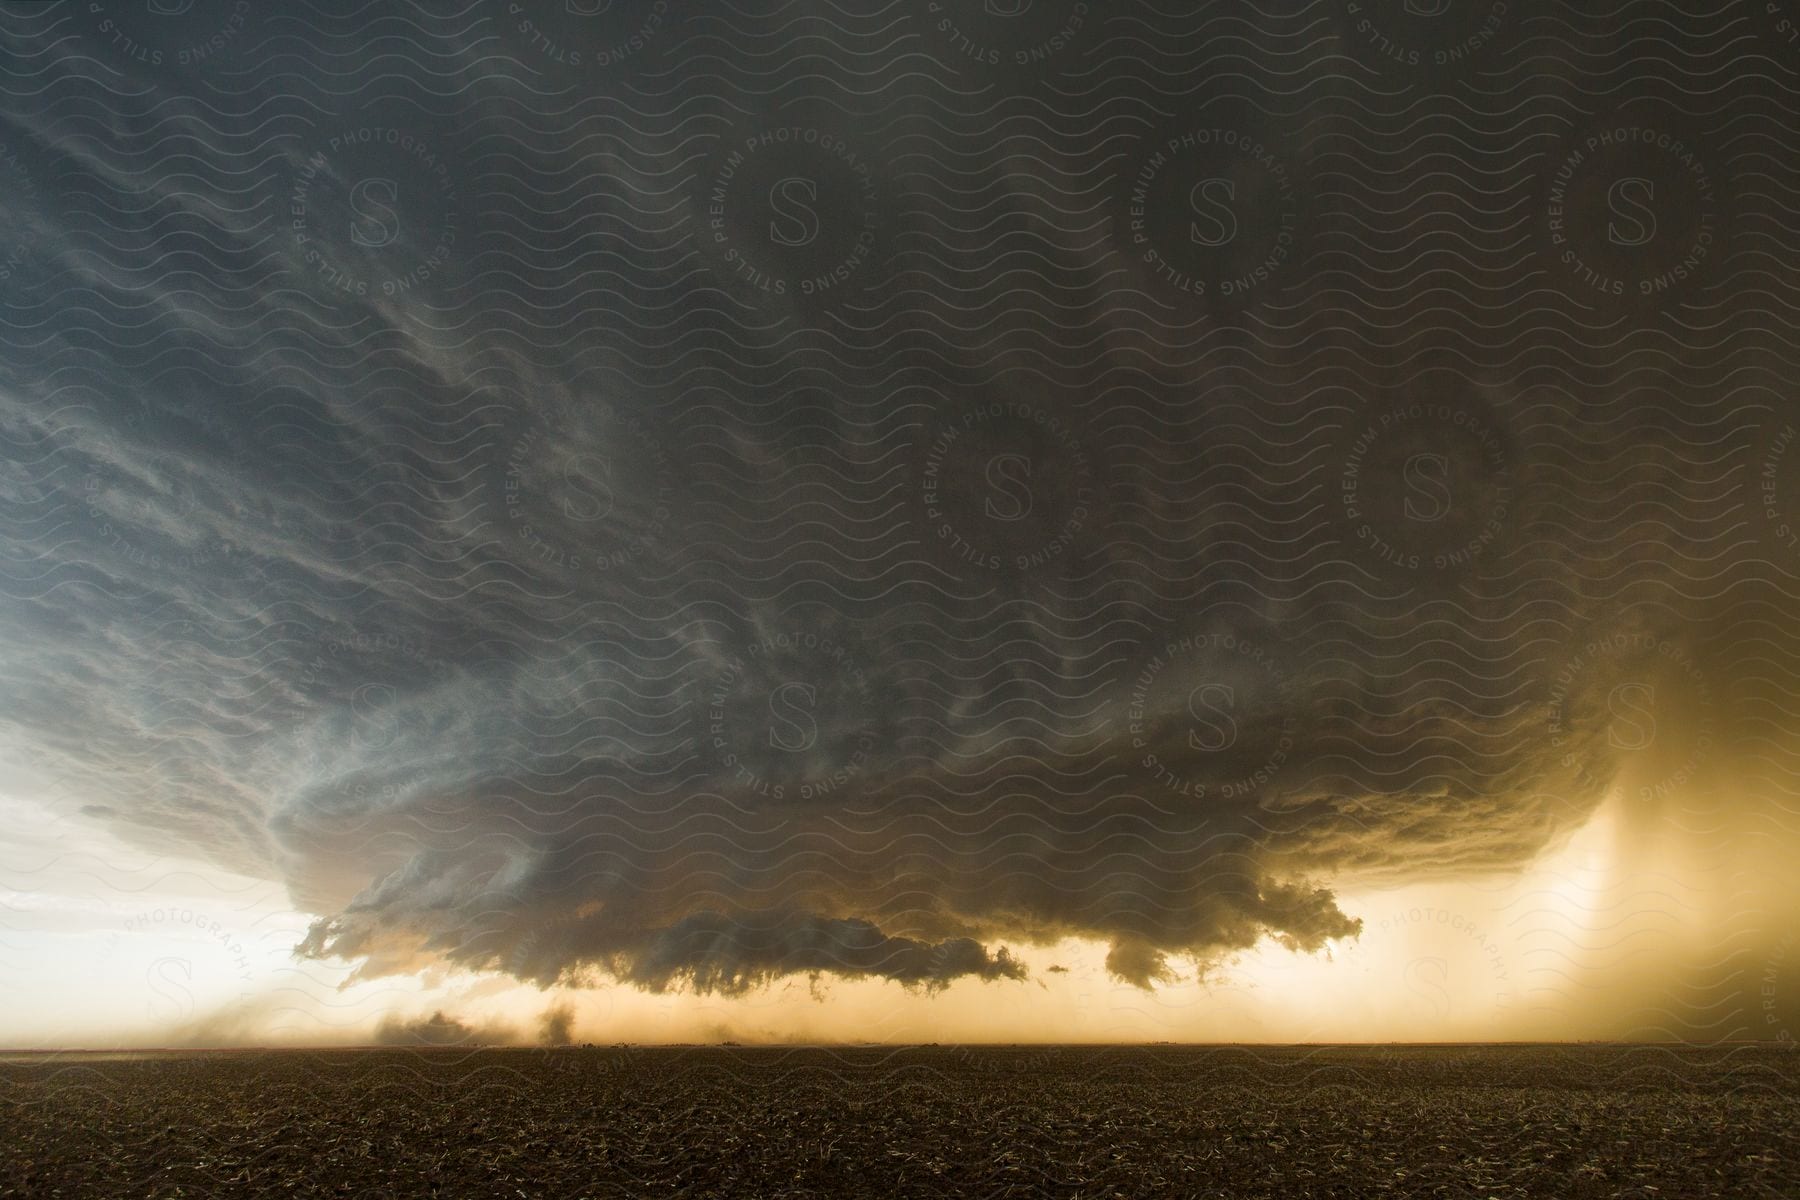 A dark supercell storm moves over rural farmland as rain pours down